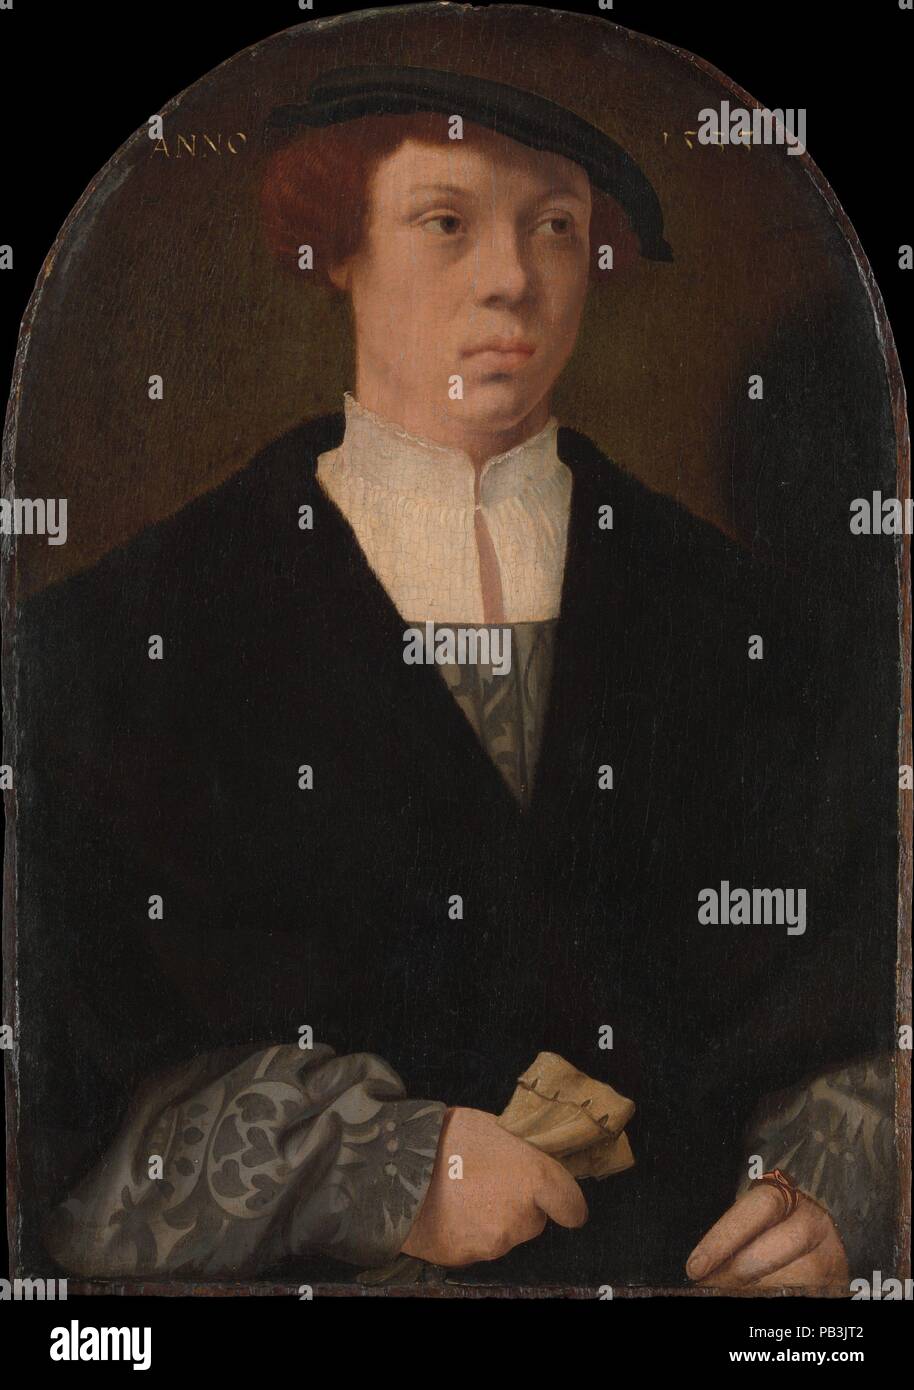 Portrait of a Man. Artist: Barthel Bruyn the Elder (German, 1493-1555). Dimensions: Overall, with arched top, 12 x 8 7/8 in. (30.5 x 22.5 cm); painted surface 11 3/4 x 8 1/8 in. (29.8 x 20.6 cm). Date: 1533.    The sitters wear costumes typical of the upper-class citizenry of Cologne, whose members were Bruyn's usual patrons. The woman's exposed hair, visible in braids at either side of her face, indicates that the couple are depicted as engaged, not married, as married women of Cologne wore their hair completely covered. It is likely that the portraits were commissioned to commemorate their e Stock Photo